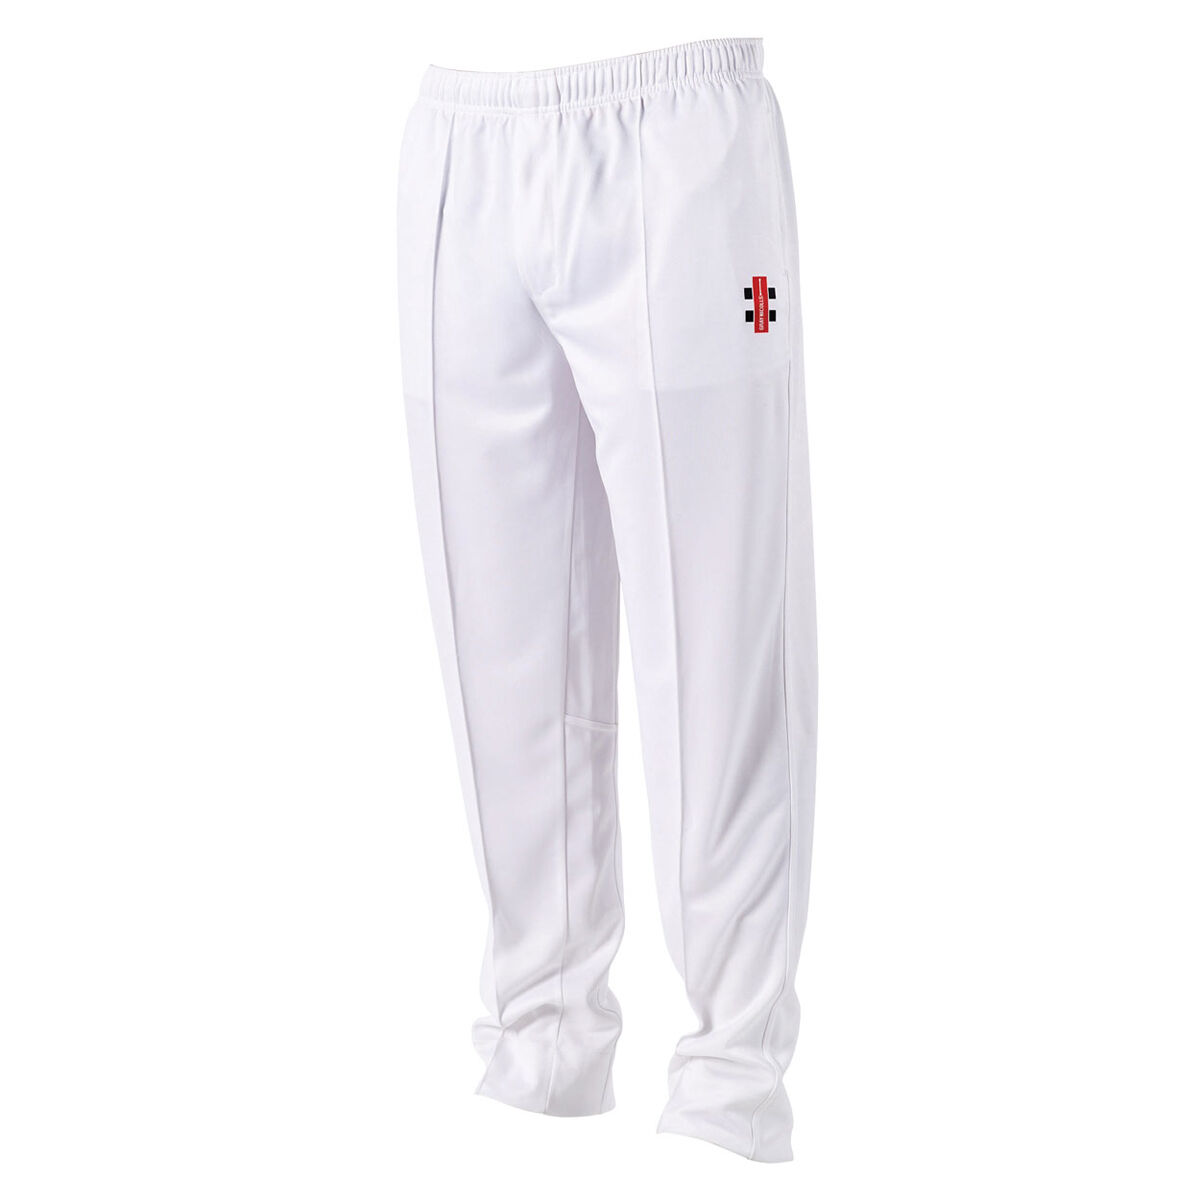 Nike Mens AS Cricket DF Training Pant 14 Track 647719410WhiteNeutral  GreayTreasure BlueLT  Amazonin Clothing  Accessories